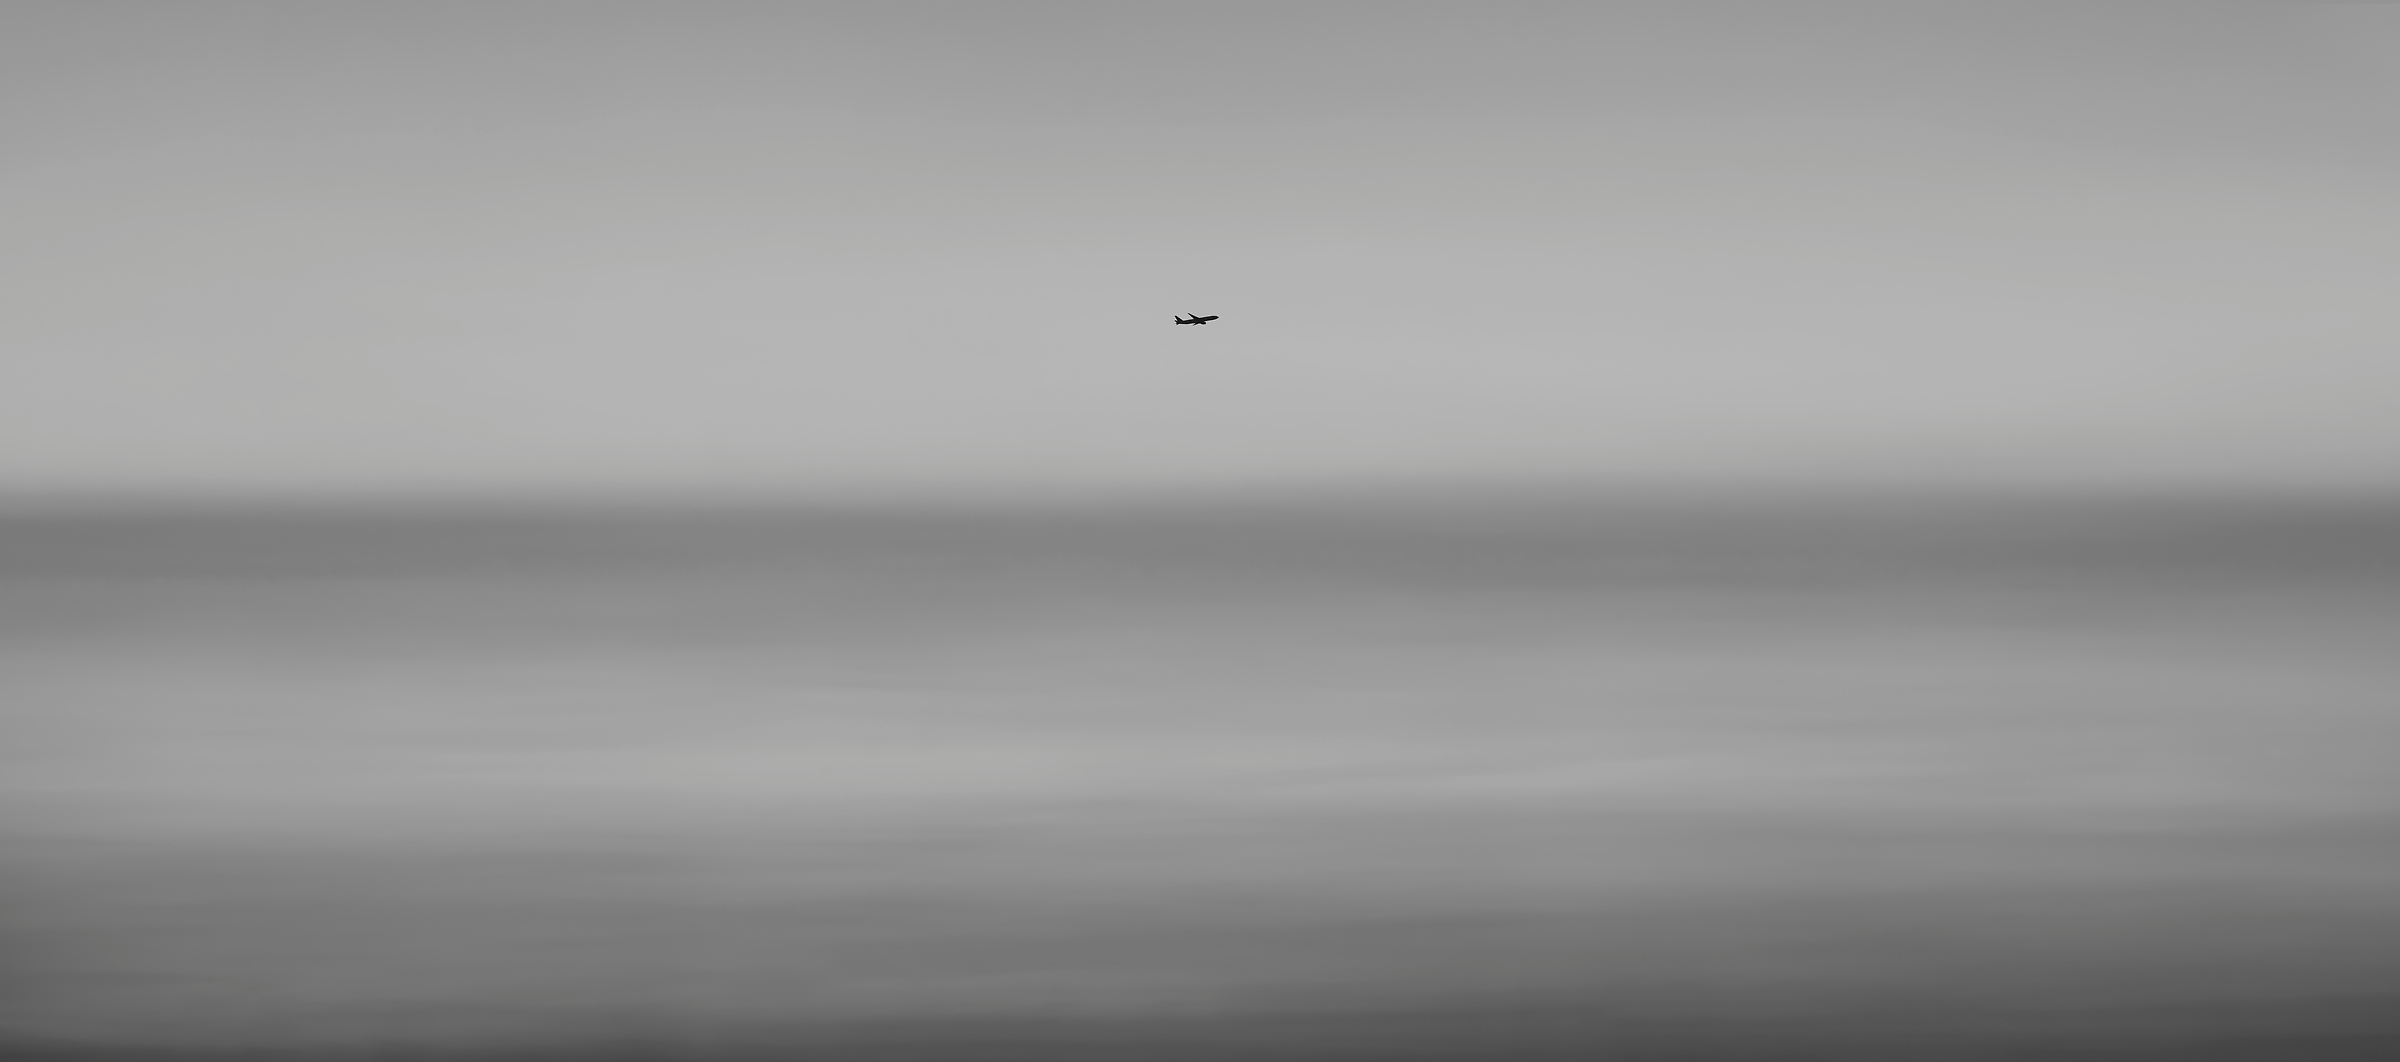 452 megapixels! A very high resolution, black & white VAST photo print of an airplane; fine art photograph created by Dan Piech in New York City.